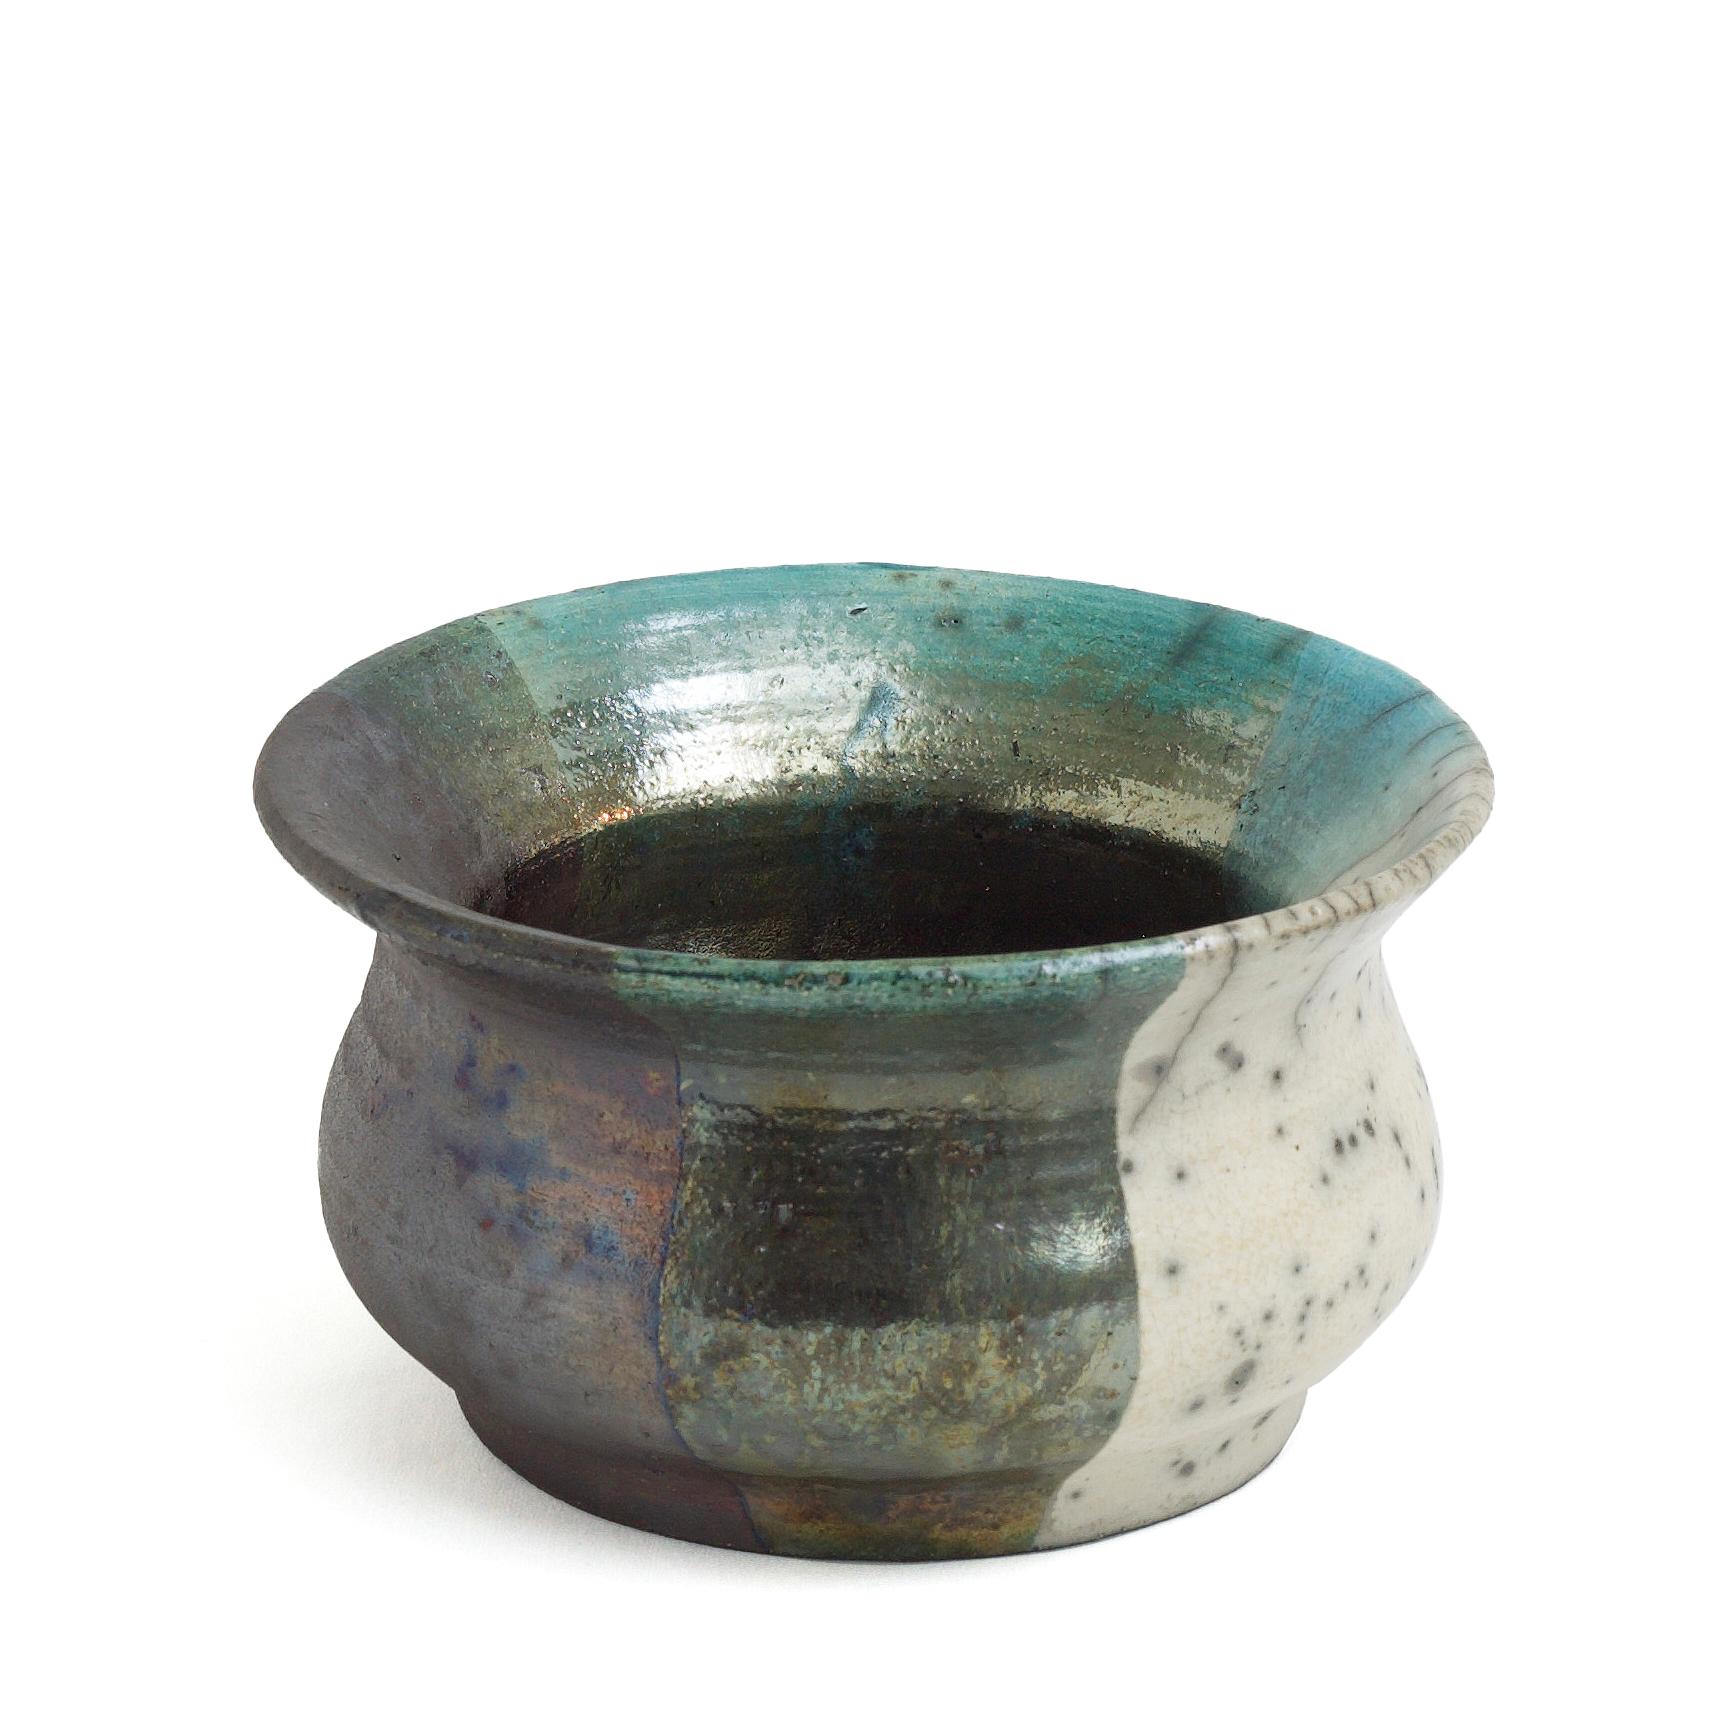 Decisione vase

Metal and ceramics are combined together in this stunning result of a modern raku bowl where the different materials shine on their own and where metallic and crackled effects coexist in a breath-taking array of hues ranging from